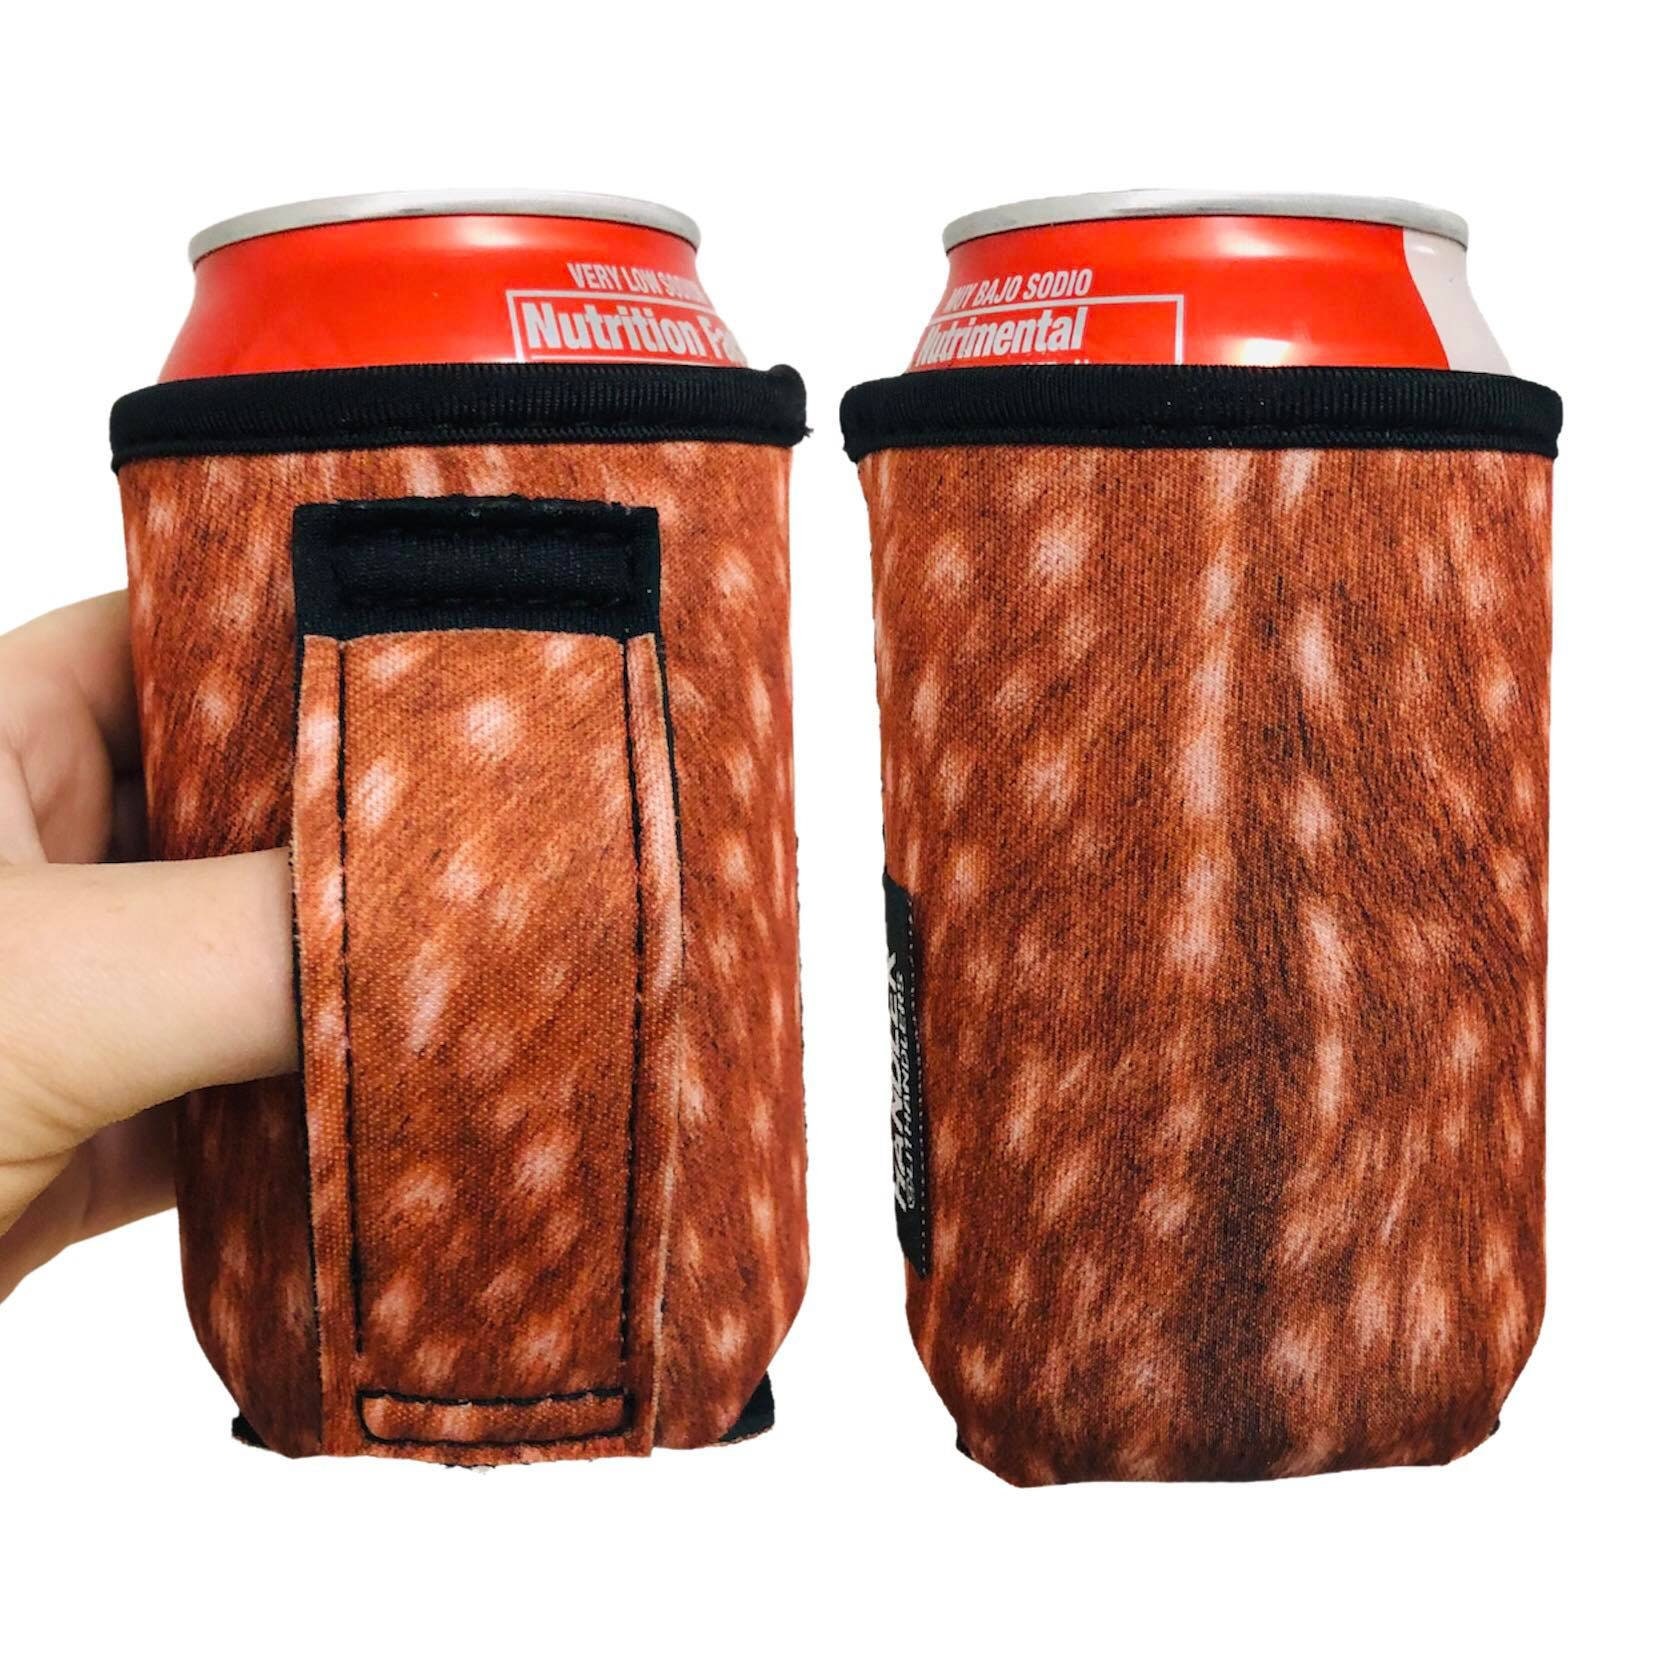 HIDE A BEER 16 oz CAN COVER Tall Boy with free KOOZIE